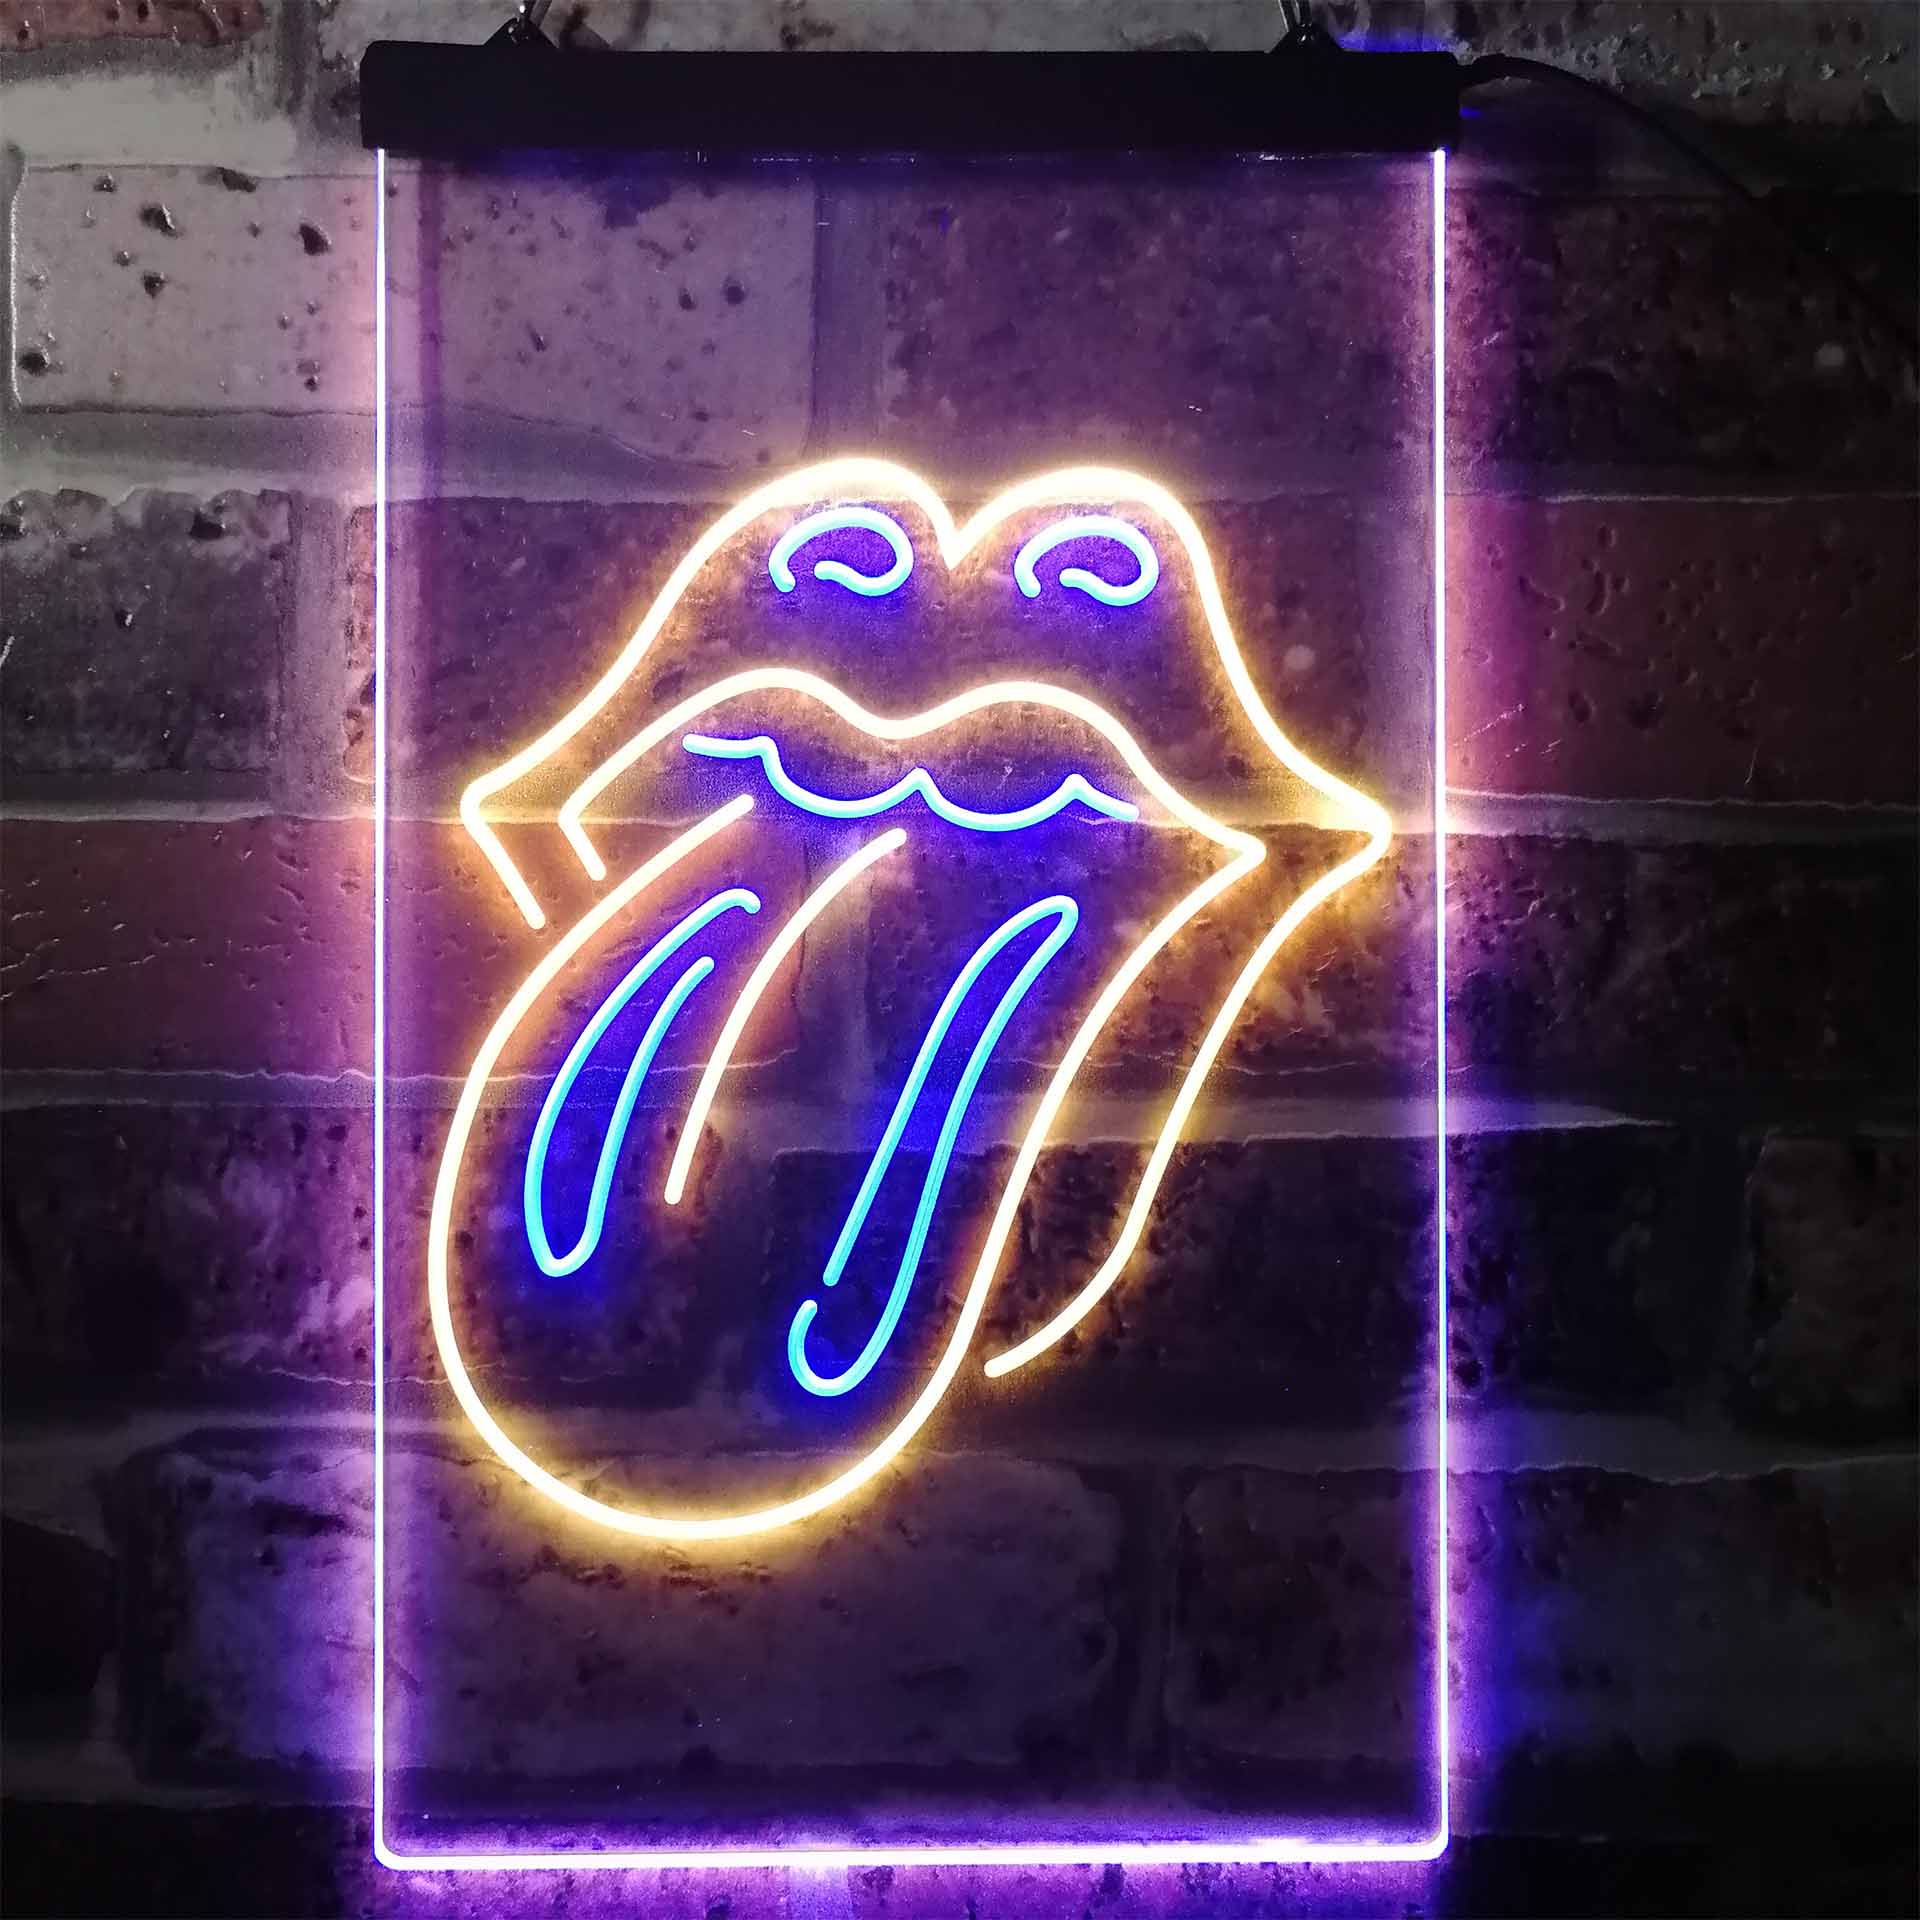 Rolling Stones Logo 2 Neon LED Sign